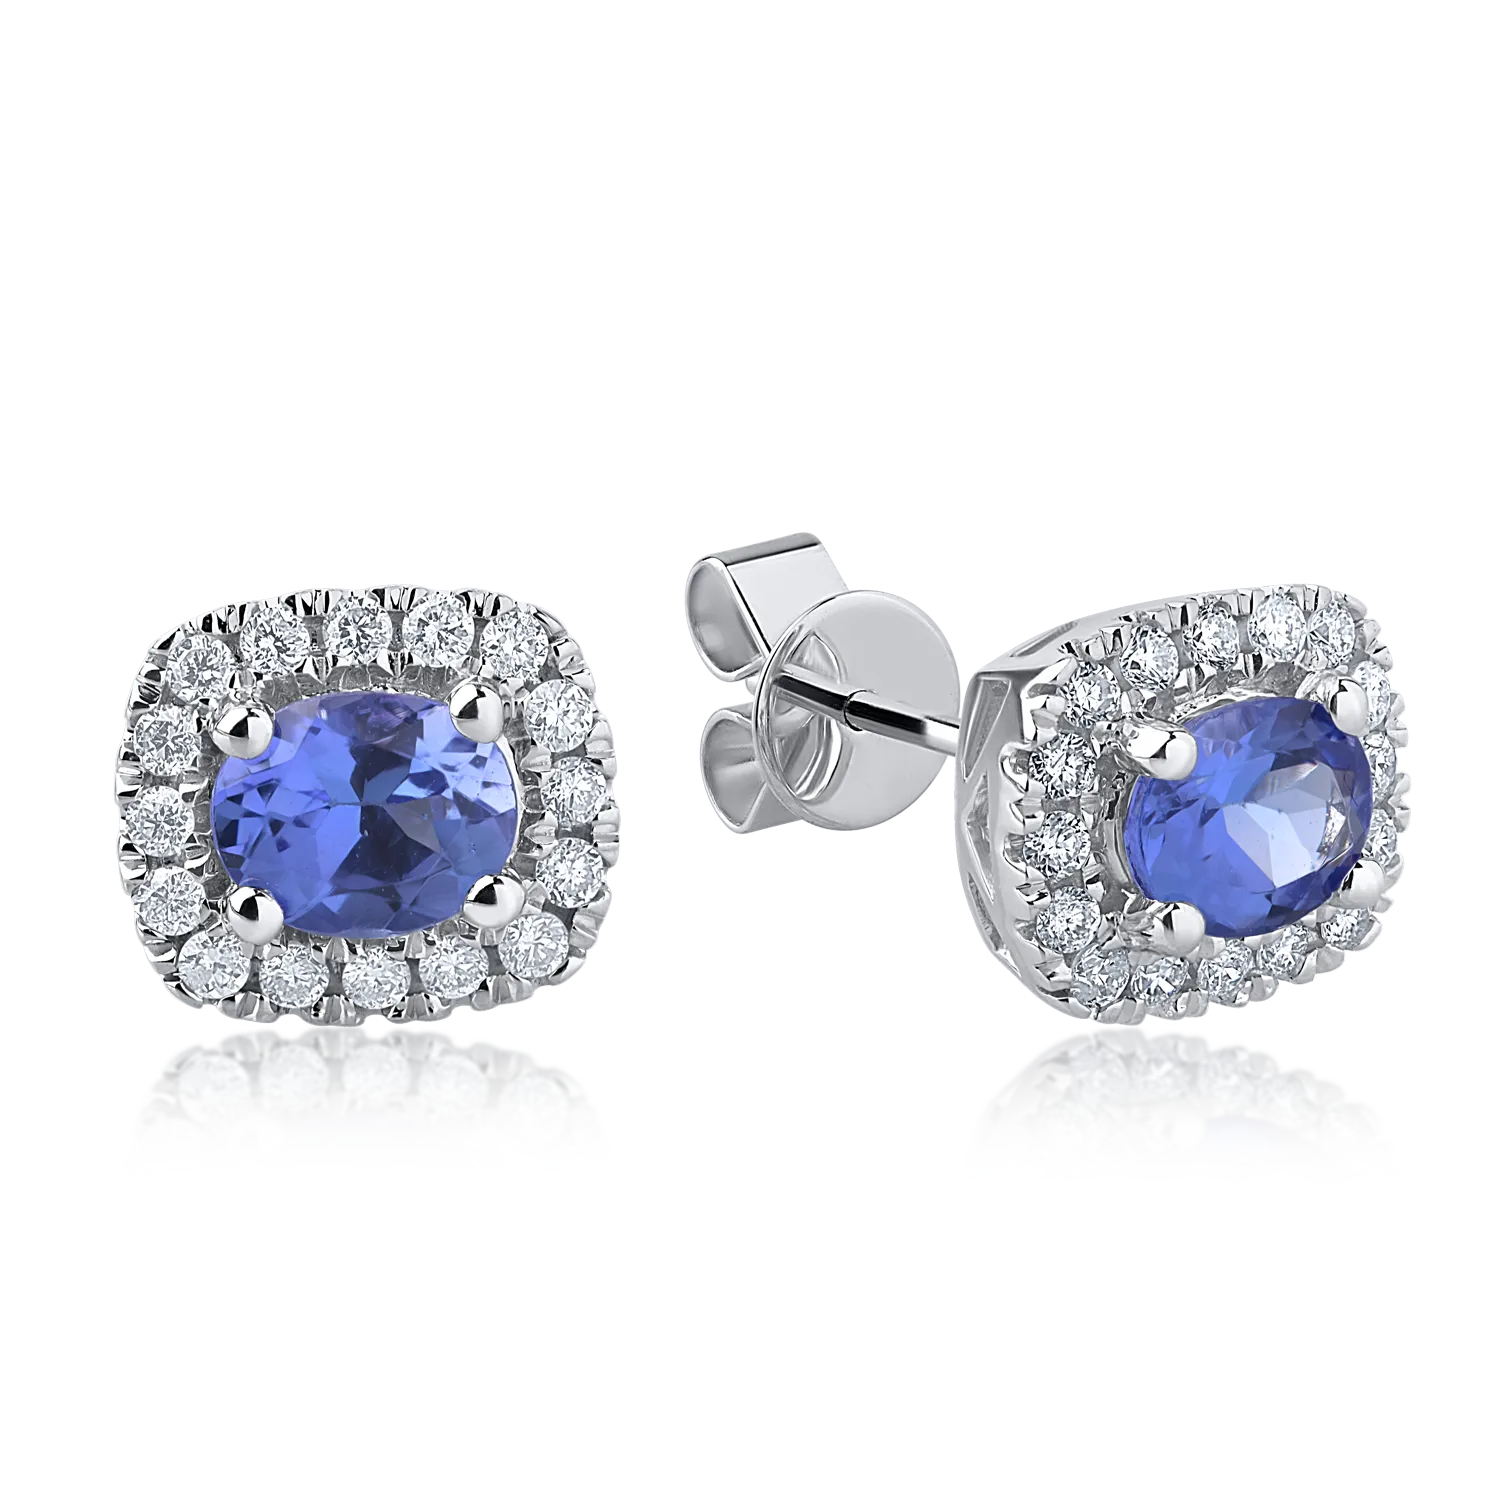 White gold earrings with 0.8ct tanzanites and 0.21ct diamonds